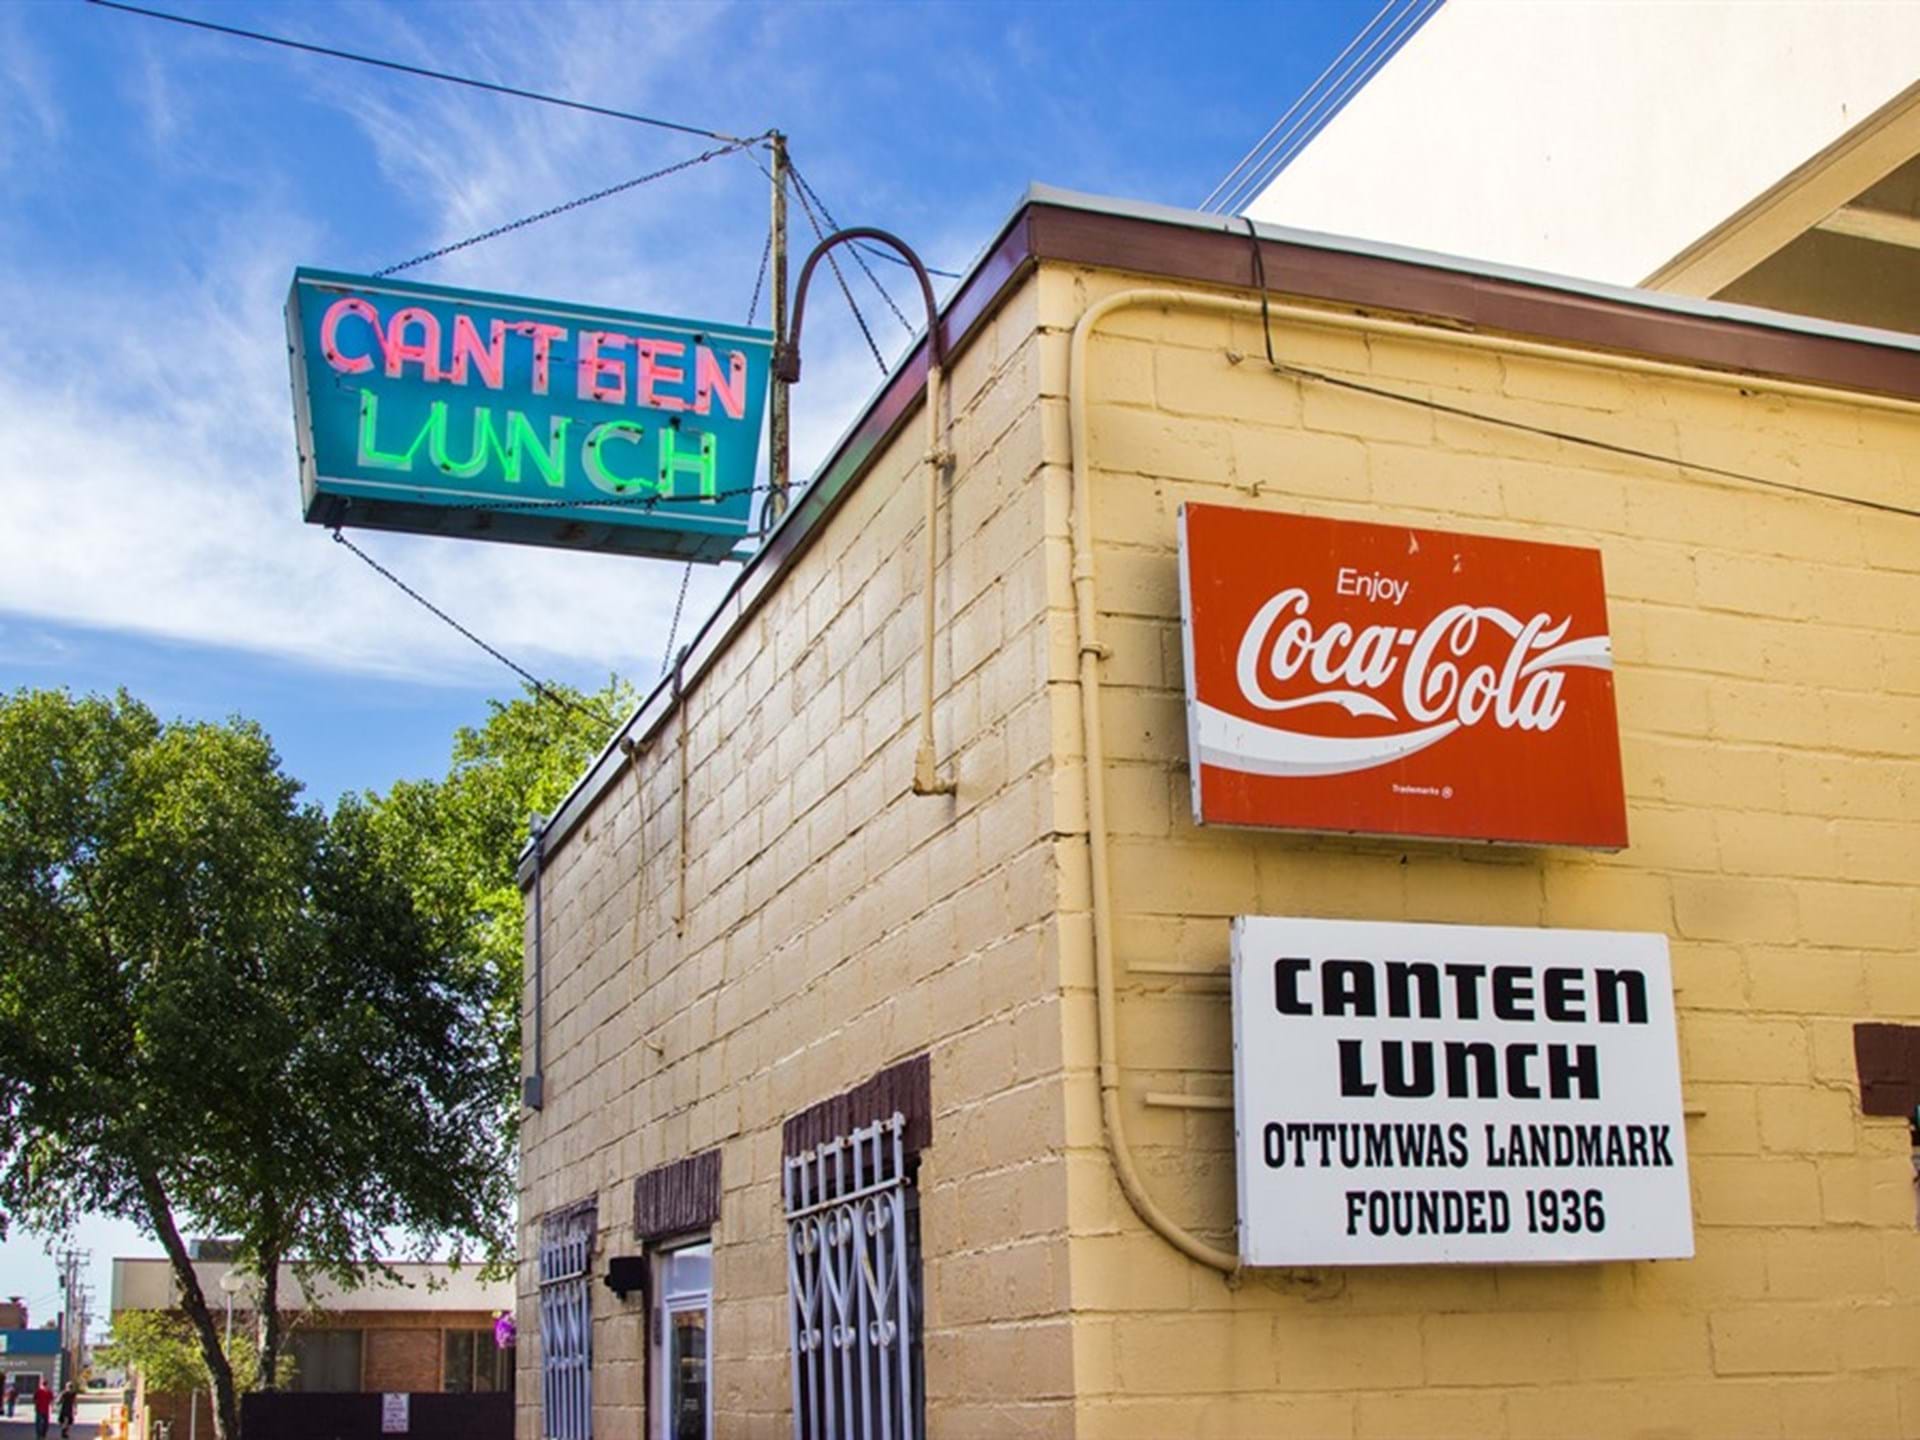 Canteen Lunch in the Alley